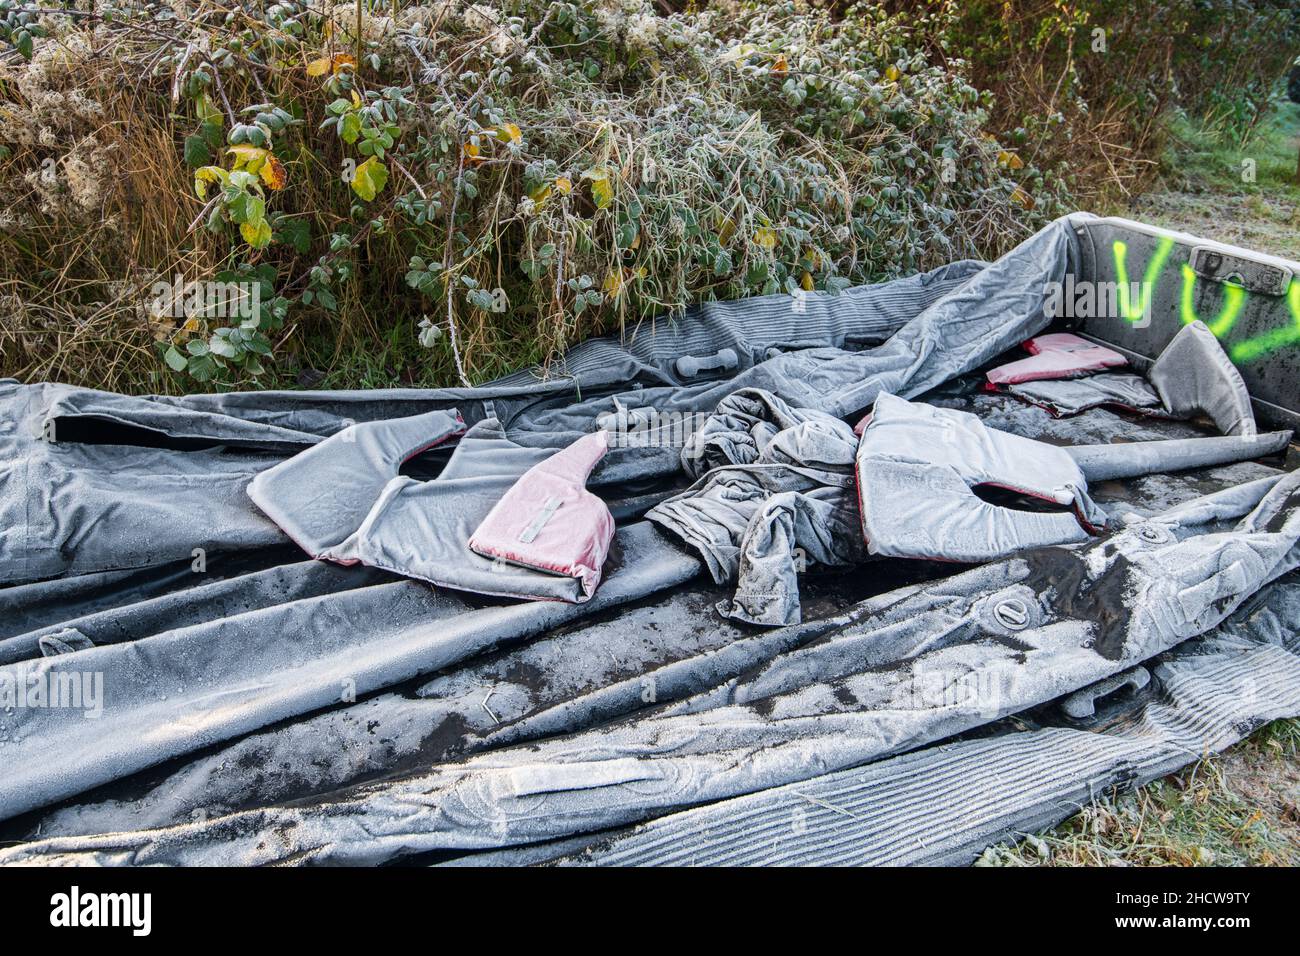 Ambleteuse, France - December 22, 2021 : inflatable boat and life jacket abandoned by migrants wishing to cross the Channel. Stock Photo